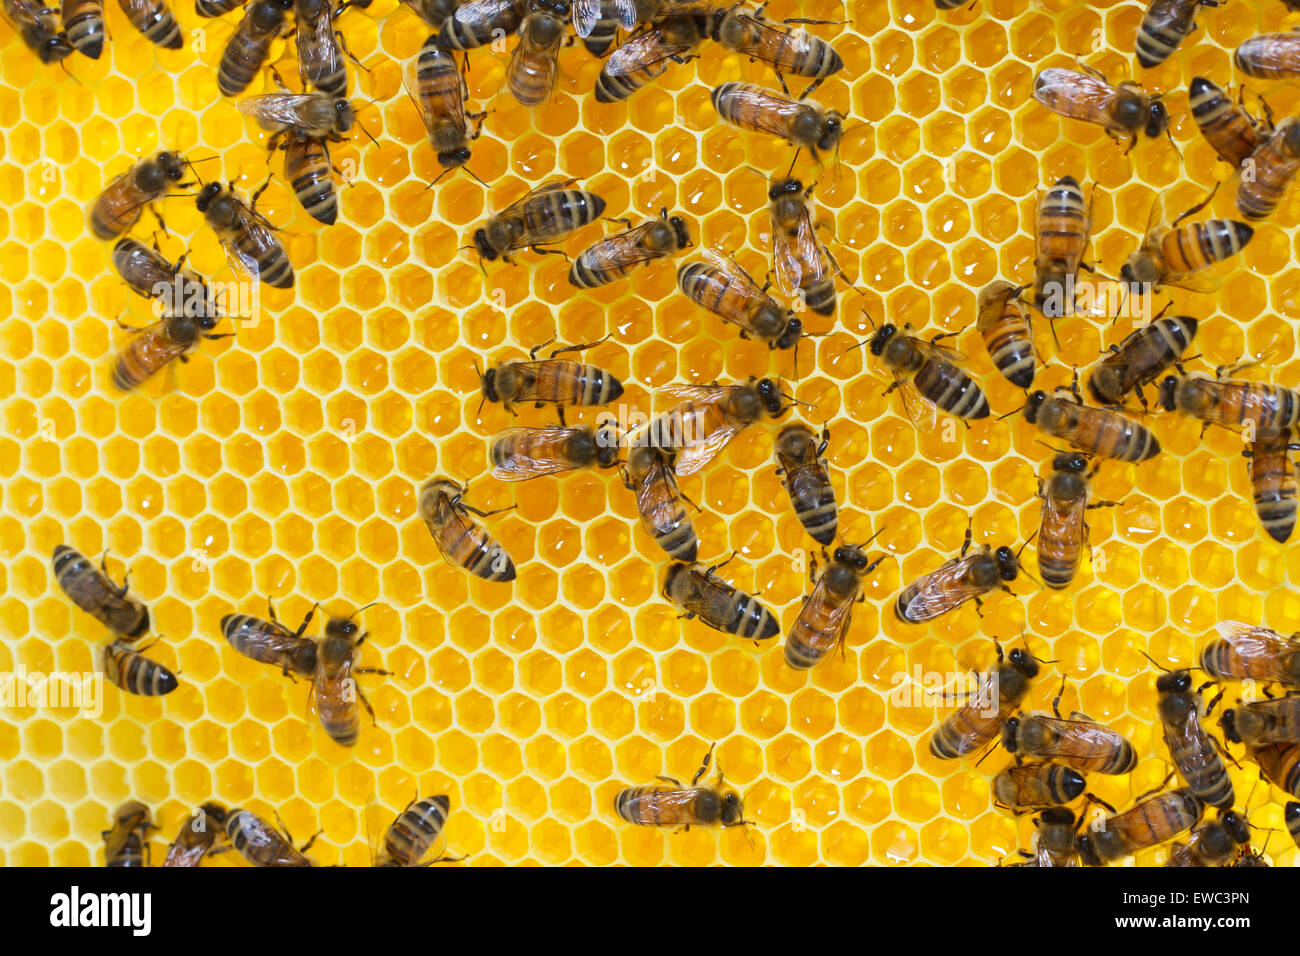 Working bees on honey cells Stock Photo